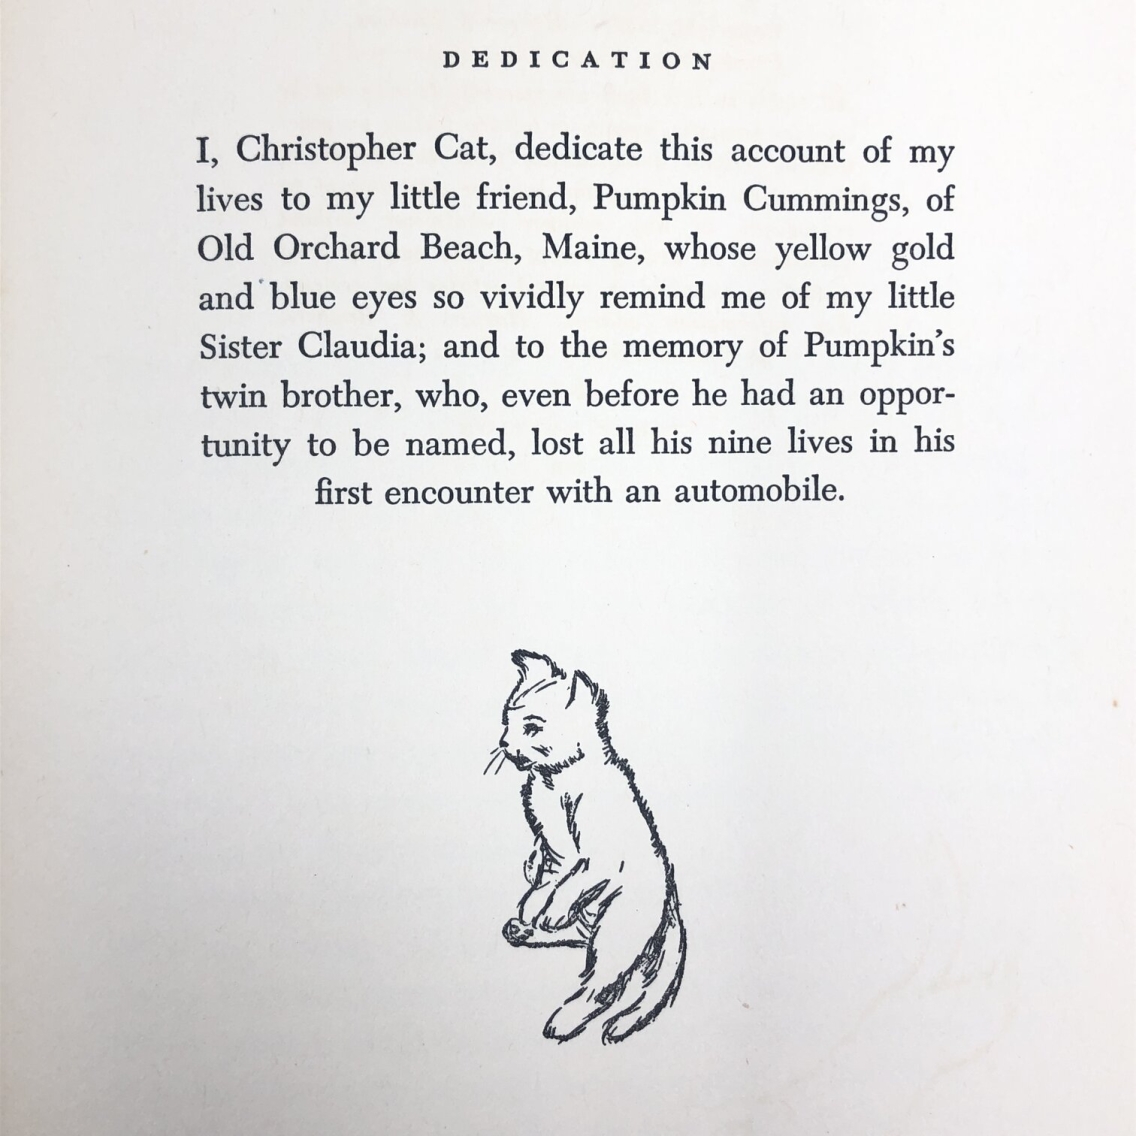 Photograph of the dedication in My Lives and How I Lost Them by Countee Cullen. The dedication reads, "I, Christopher Cat, dedicate this account of my lives to my little friend Pumpkin Cummings, of Old Orchard Beach, Maine, whose yellow gold and blue eyes so vividly remind me of my little Sister Claudia; and to the memory of Pumpkin's twin brother, who, even before he had an opportunity to be named, lost all his nine lives in his first encounter with an automobile."